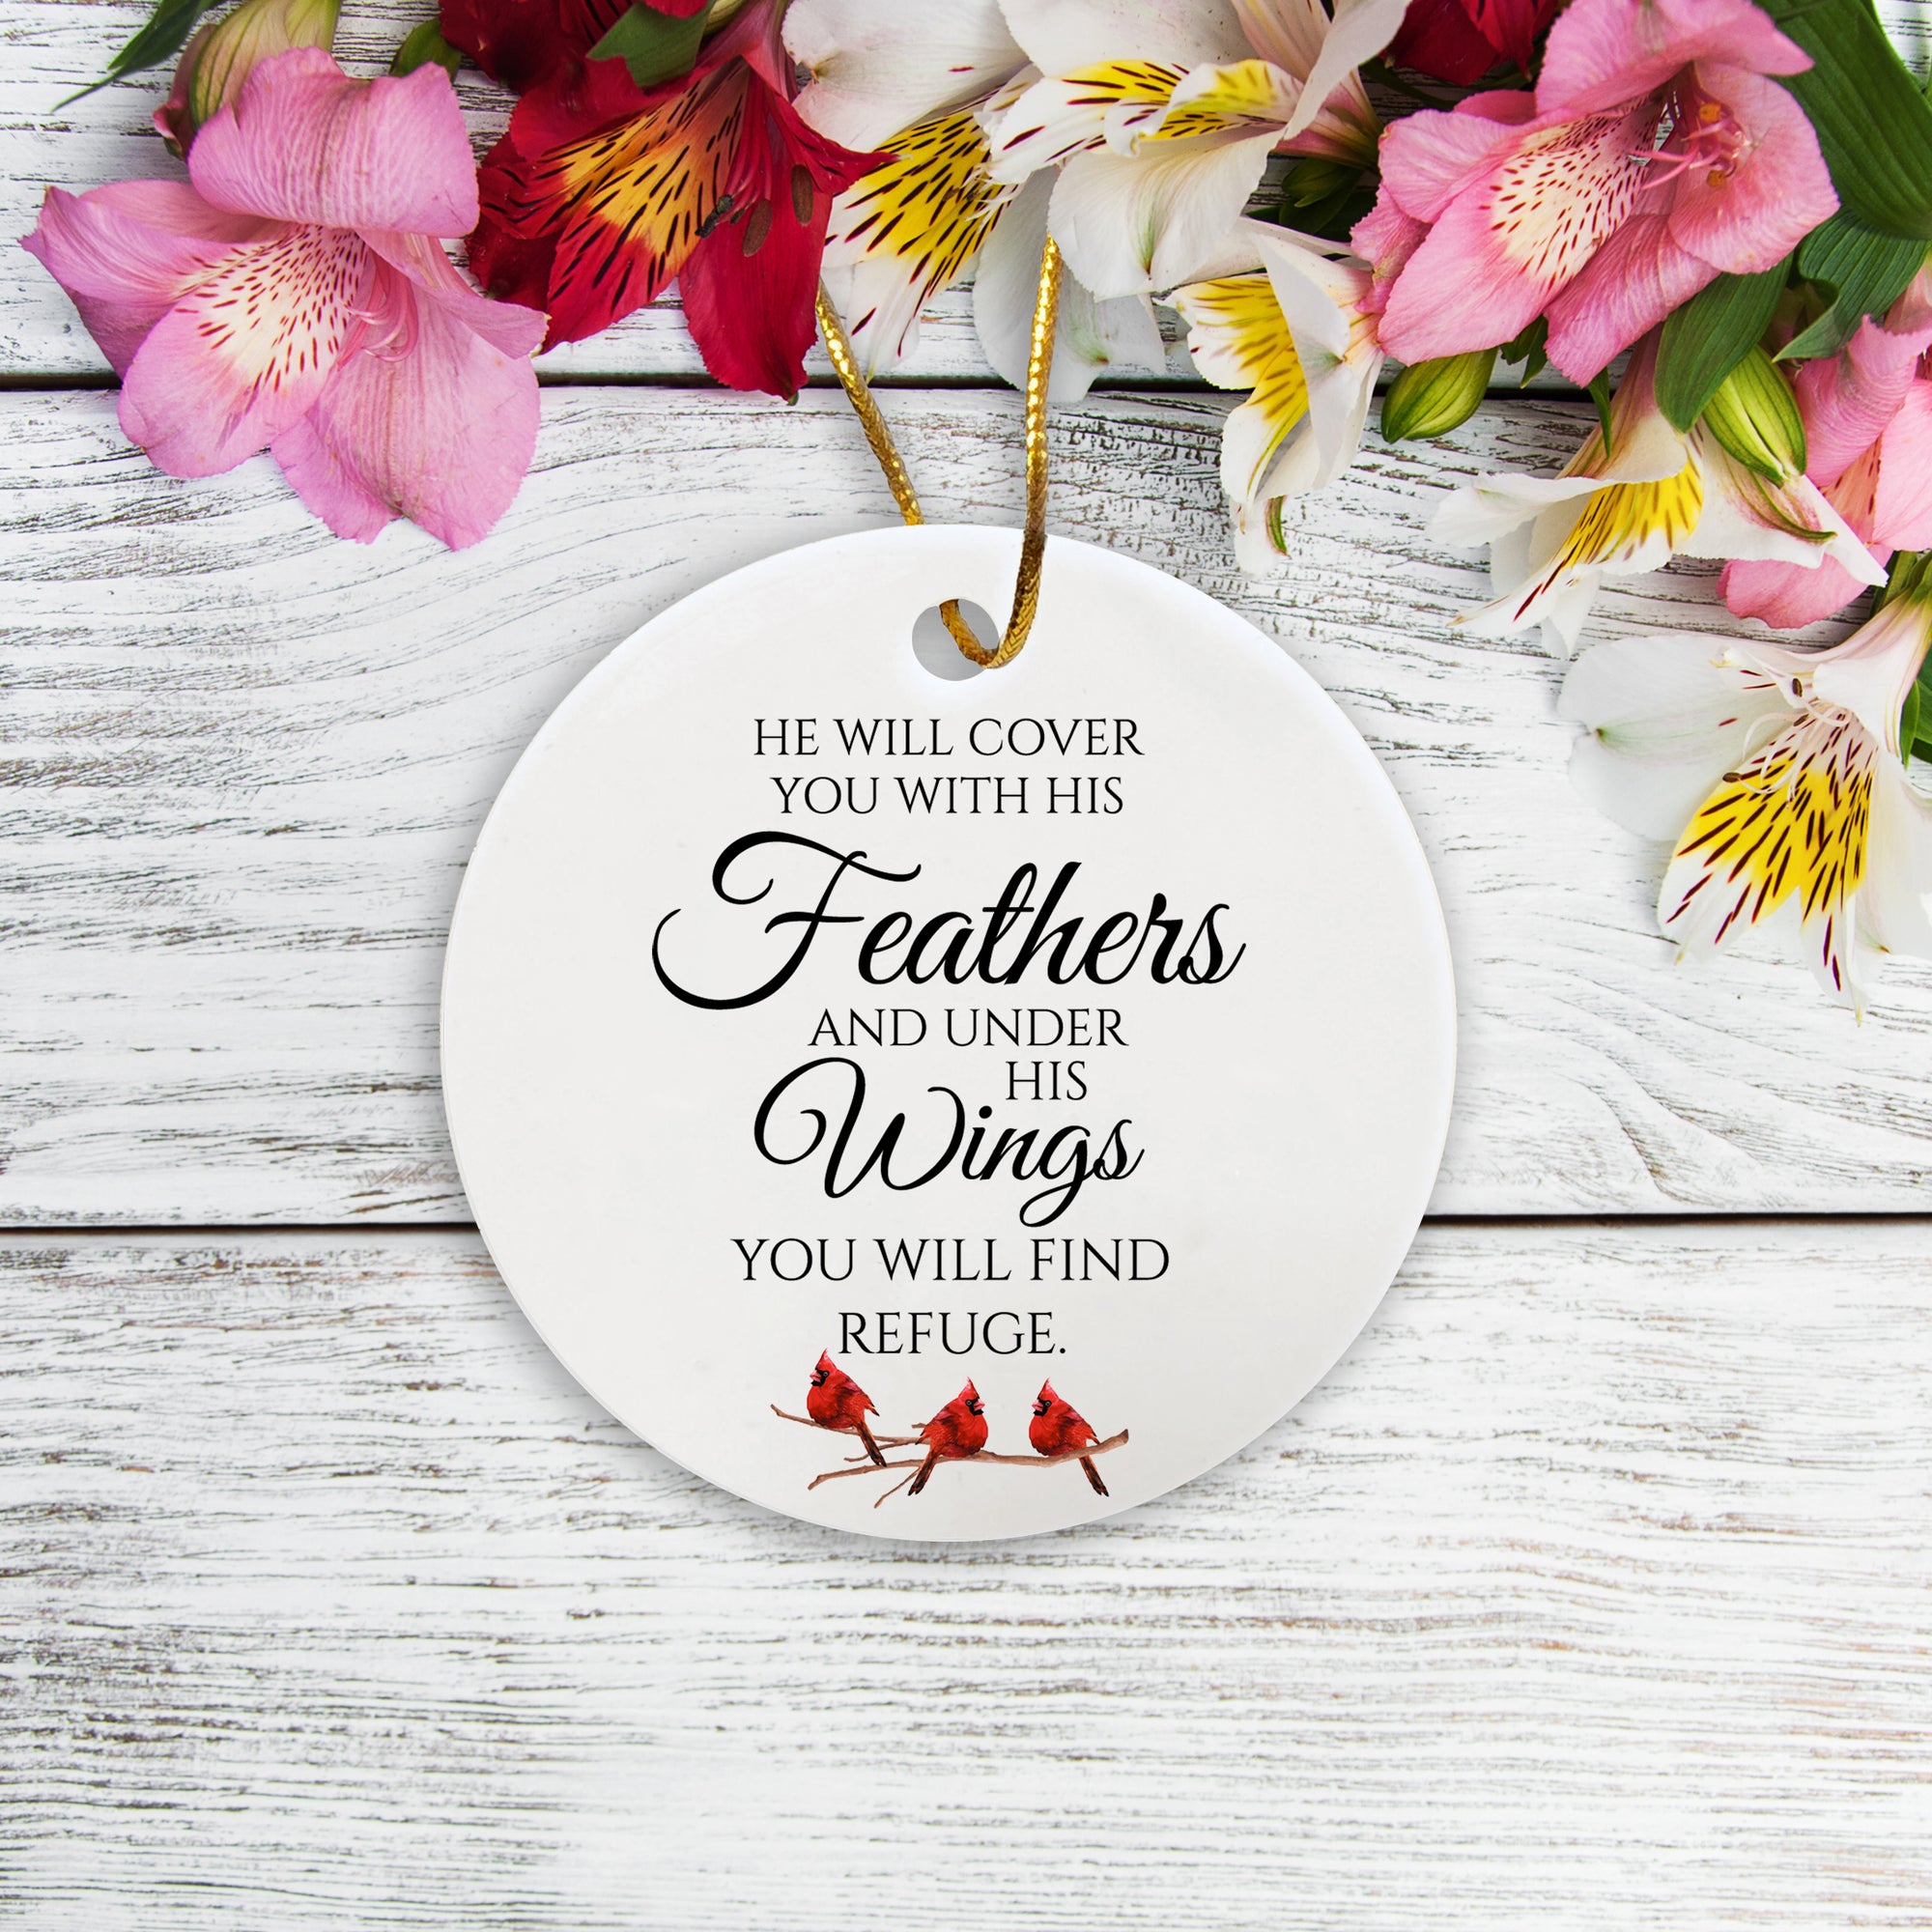 Meaningful gift idea: white ceramic cardinal ornament with verses